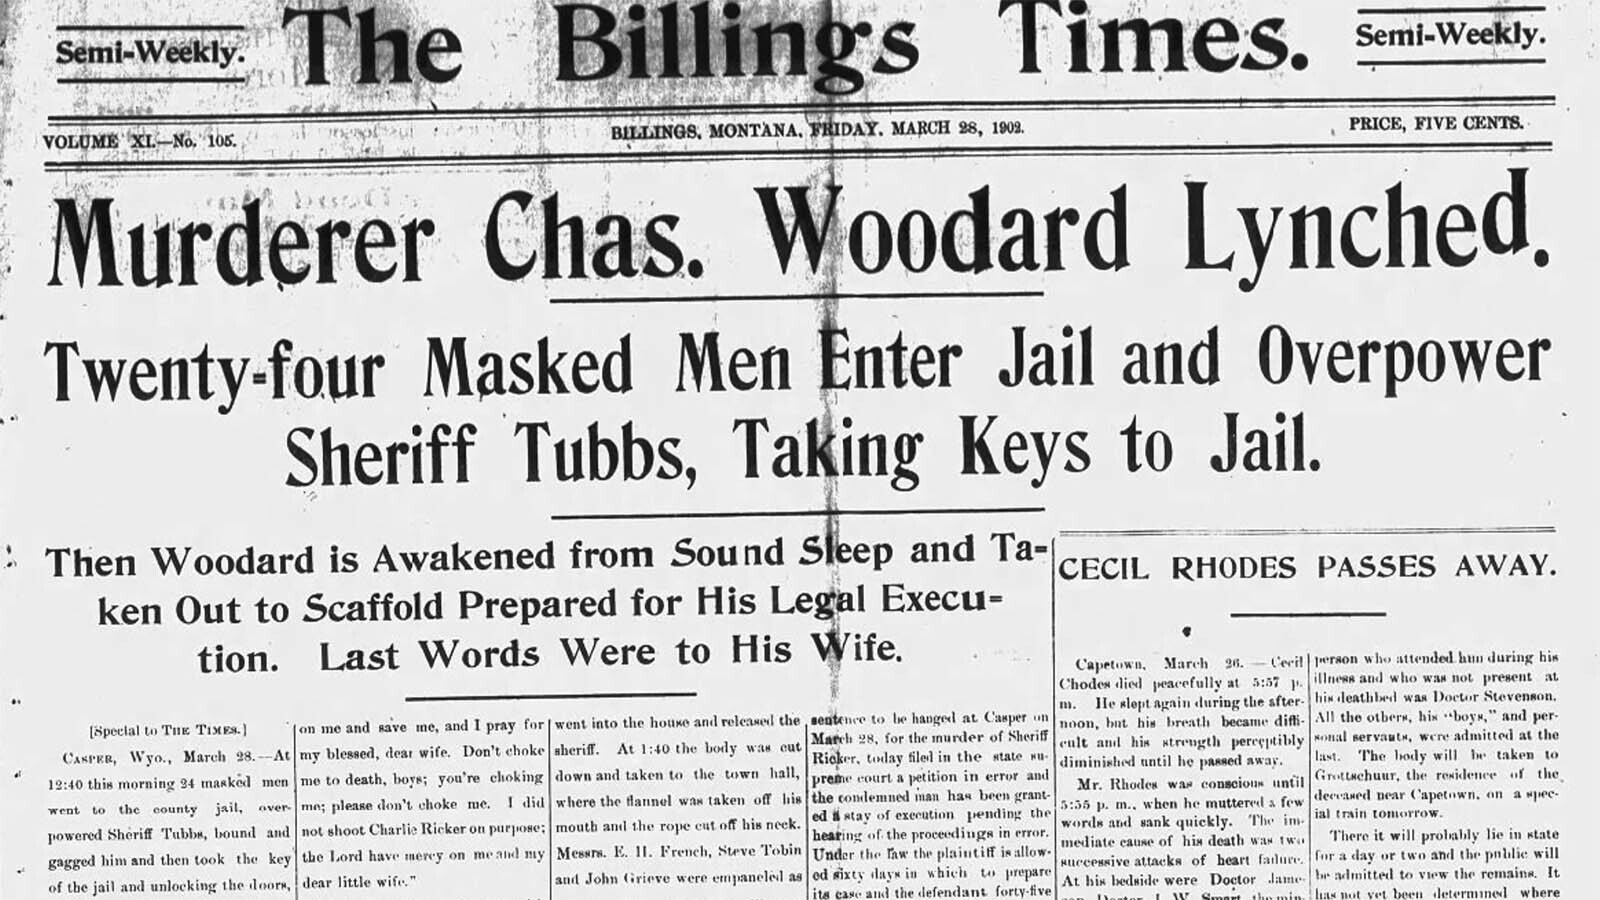 Billings, Montana, headline announces the lynching of Charles Woodard on Good Friday, March 28, 1902.